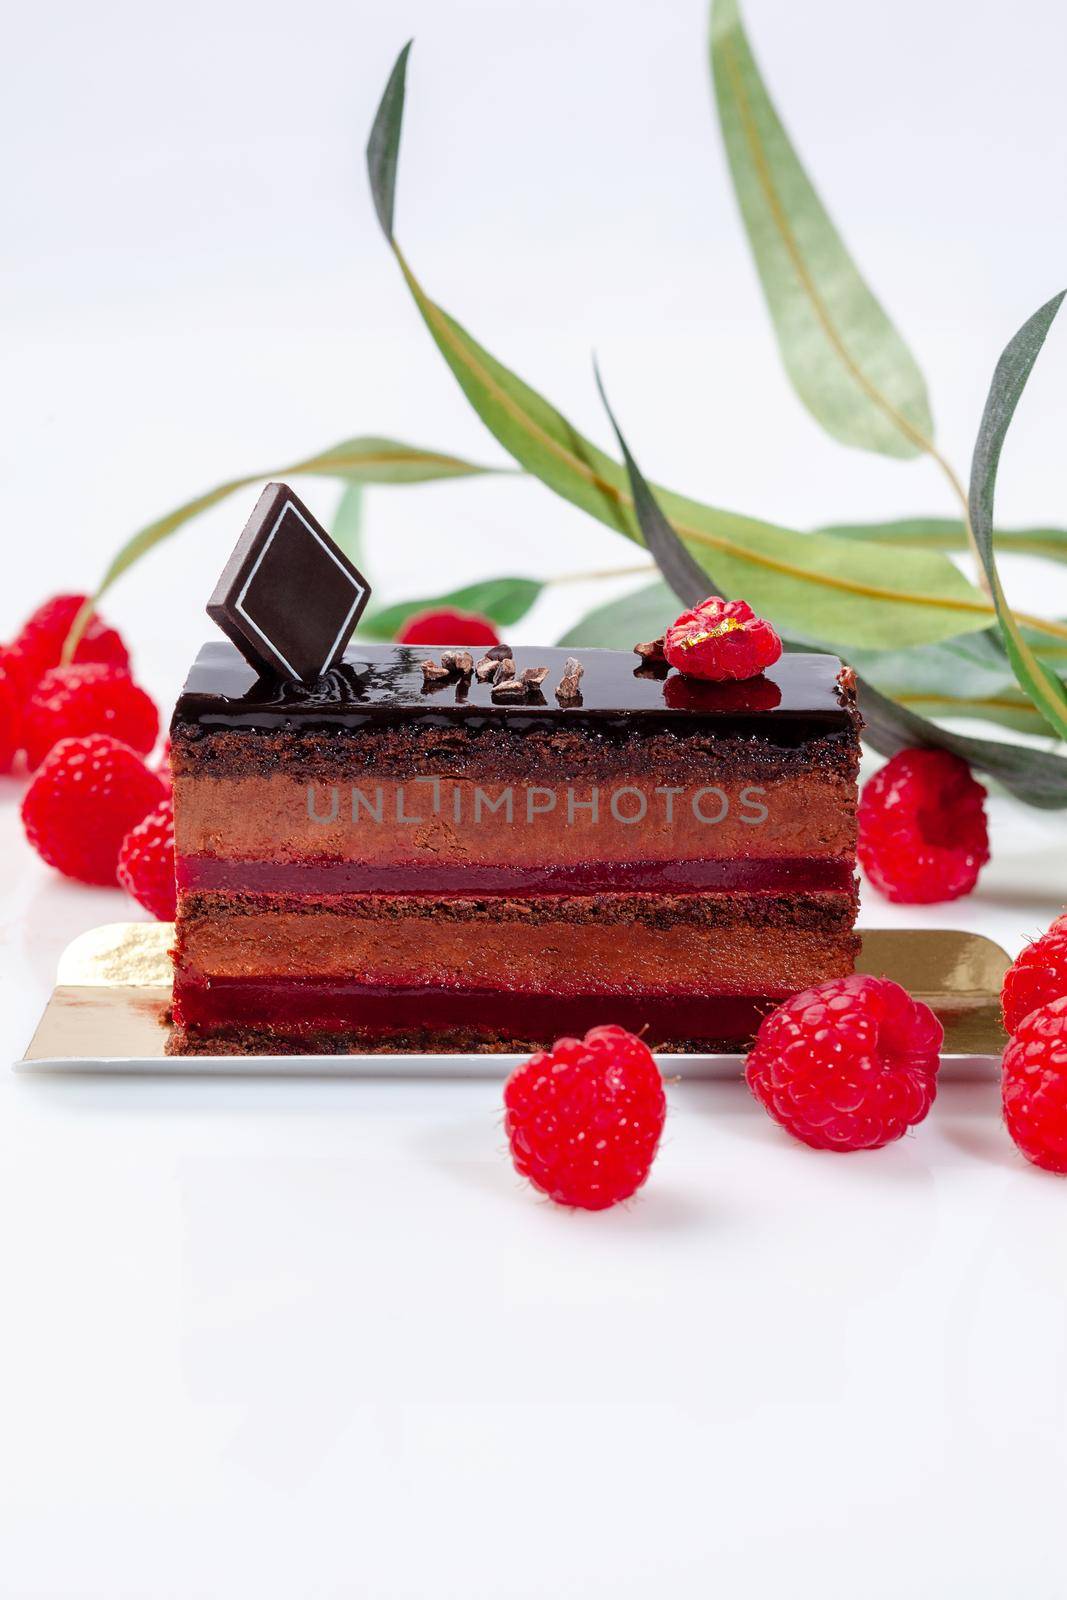 Delicious moist chocolate sponge cake with airy chocolate mousse and raspberry confit interlayer topped with glaze and garnished with fresh berries on white background